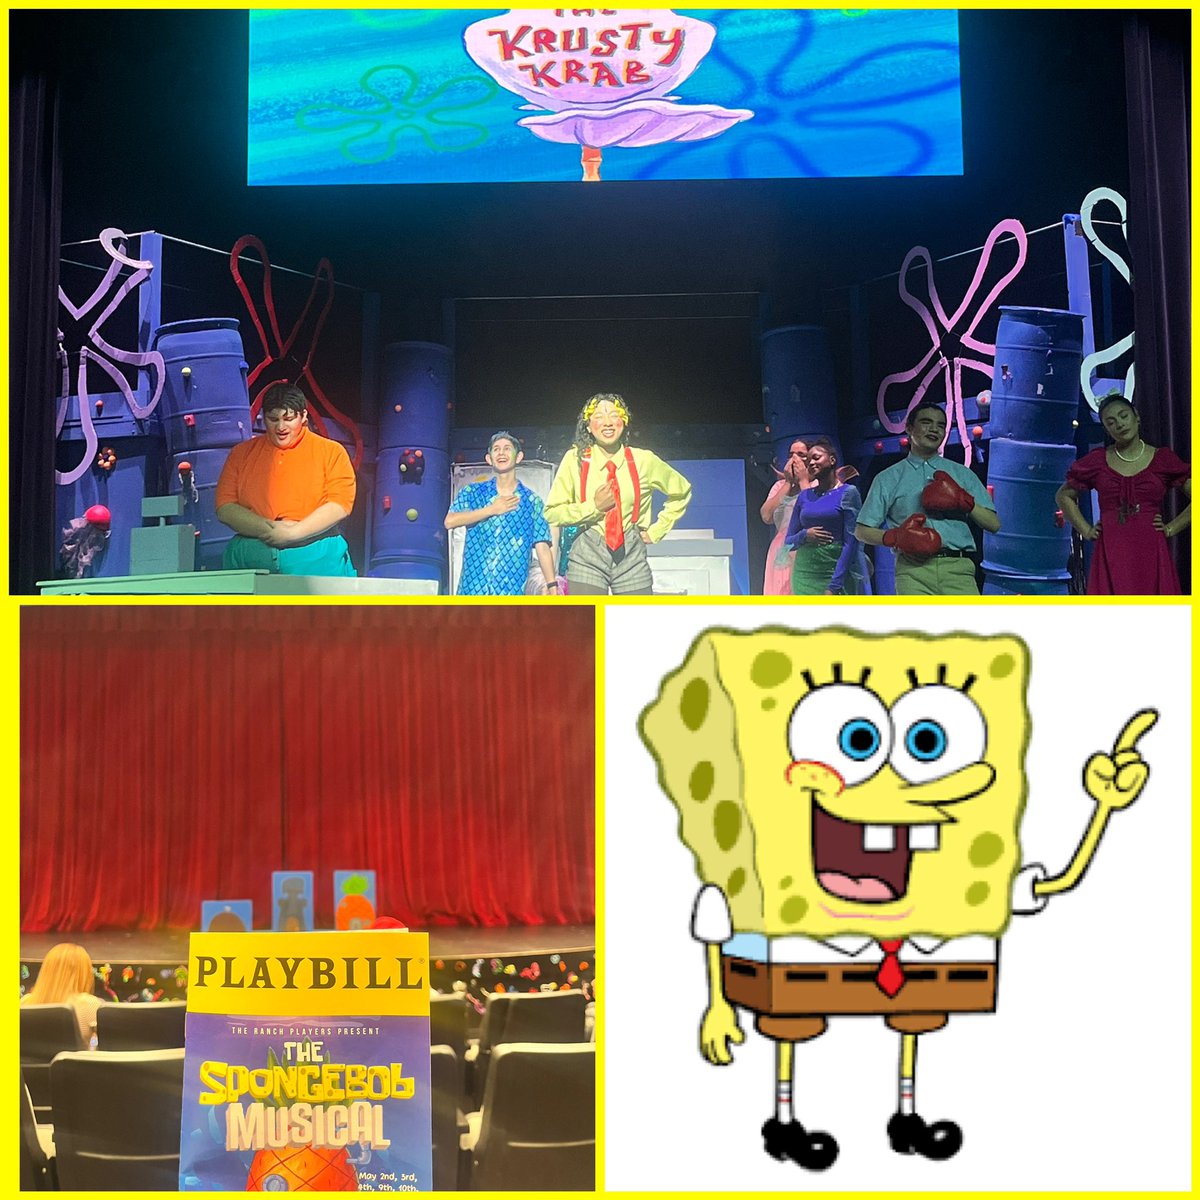 Just witnessed the incredible talent of one of our @vvusdpd's Police Explorer and @RVHS_Mustangs students performing in SpongeBob! 🎉 Such dedication and skill. Proud to support our local law enforcement community! #SupportTheExplorers #CommunityPride